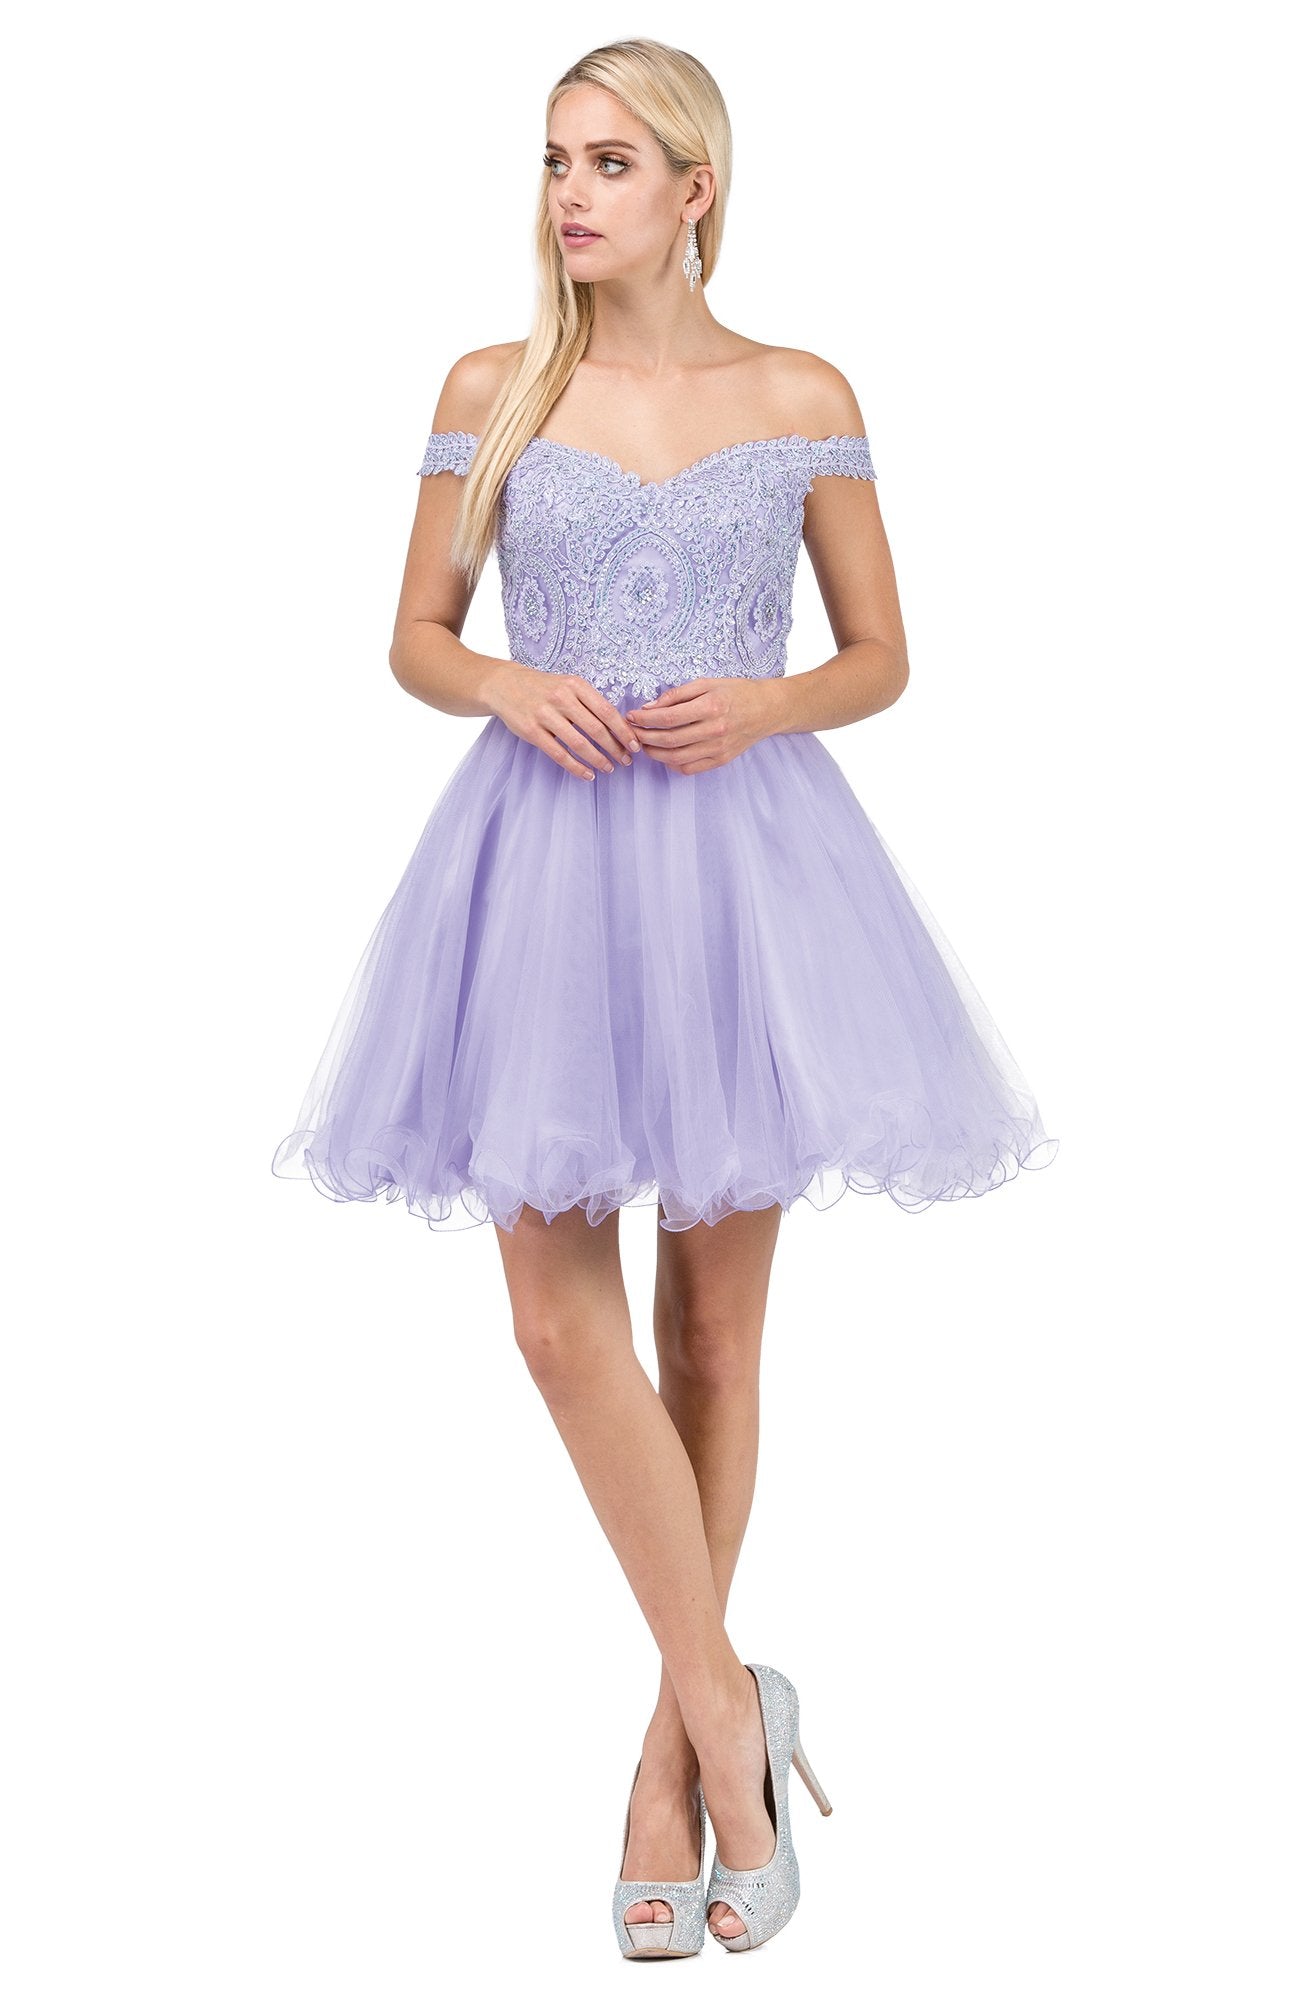 Dancing Queen - 3070 Beaded Lace Fit And Flare Cocktail Dress In Purple